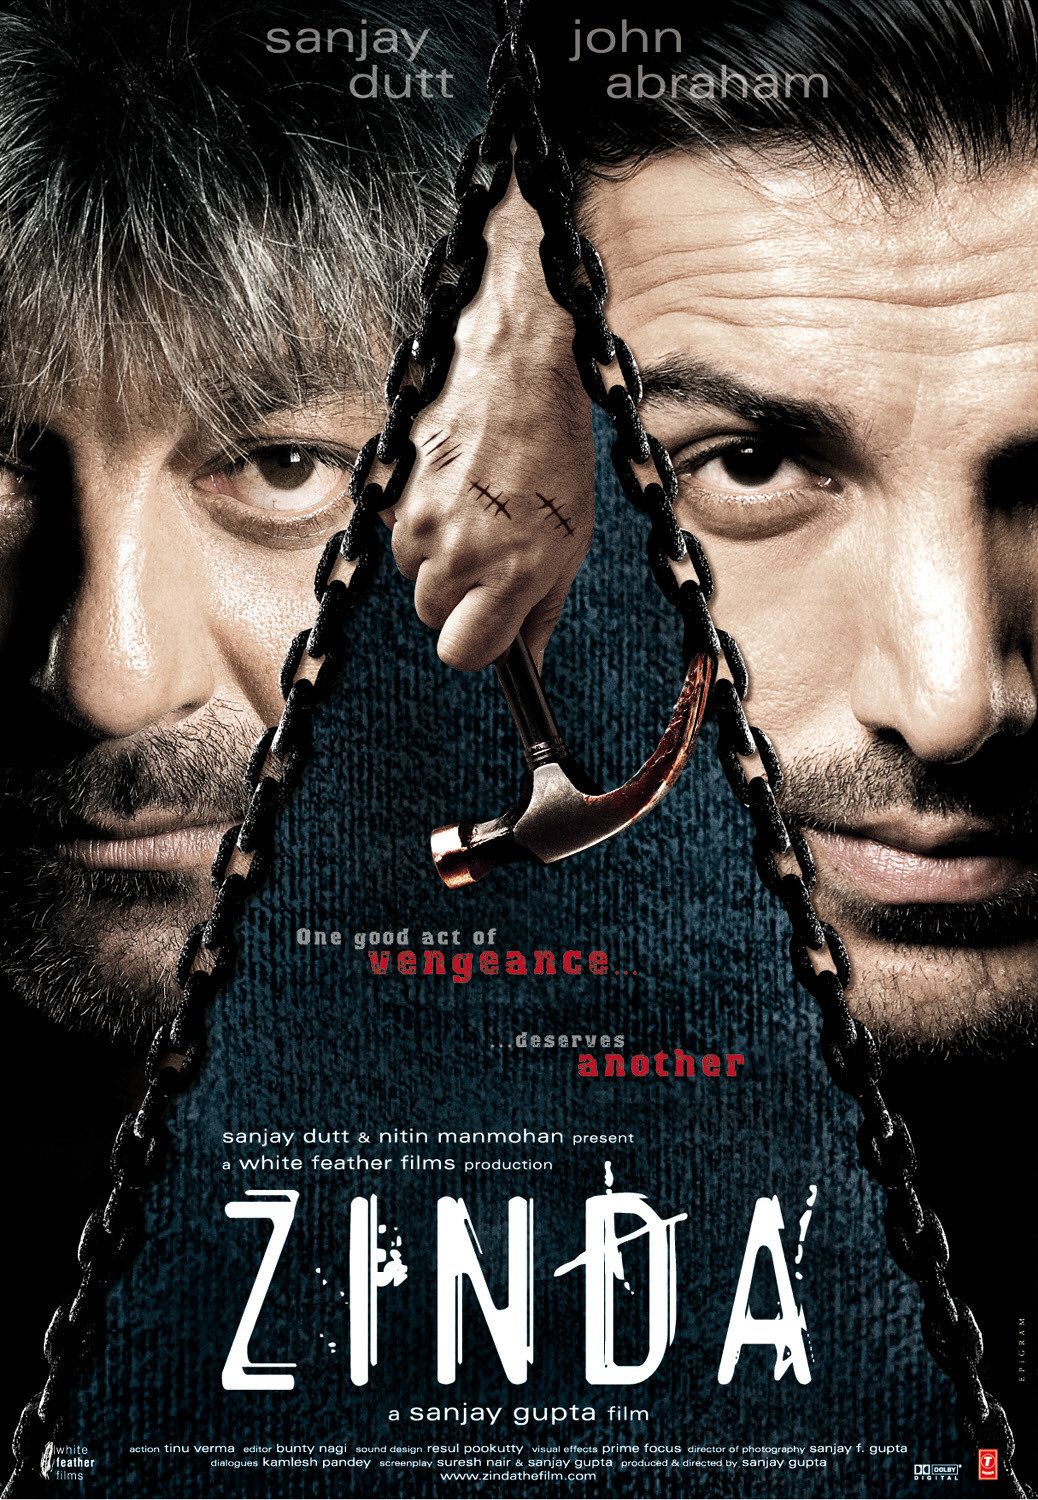 Extra Large Movie Poster Image for Zinda (#4 of 8)